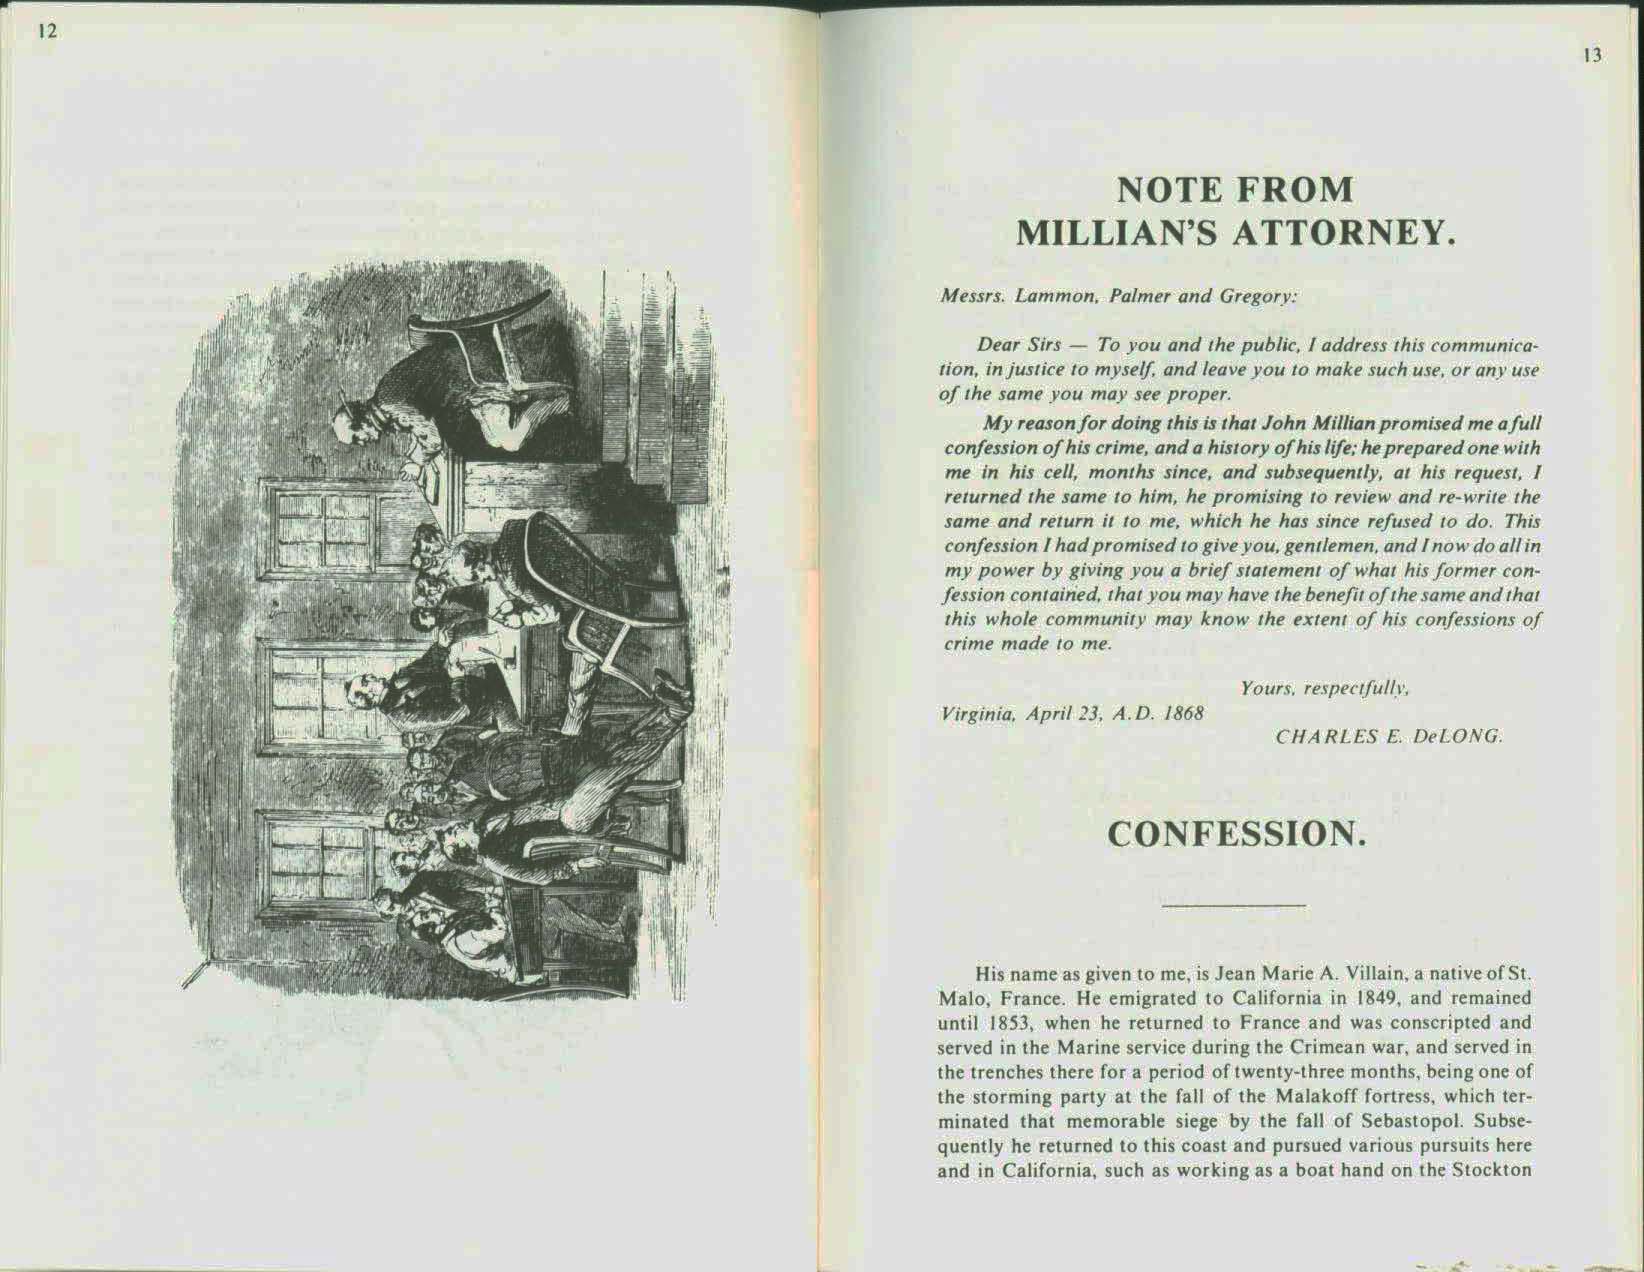 The Murder of Julia Bulette: Virginia City, Nevada; 1867--with the life and confession of John Millian, convicted murderer. vist0044f